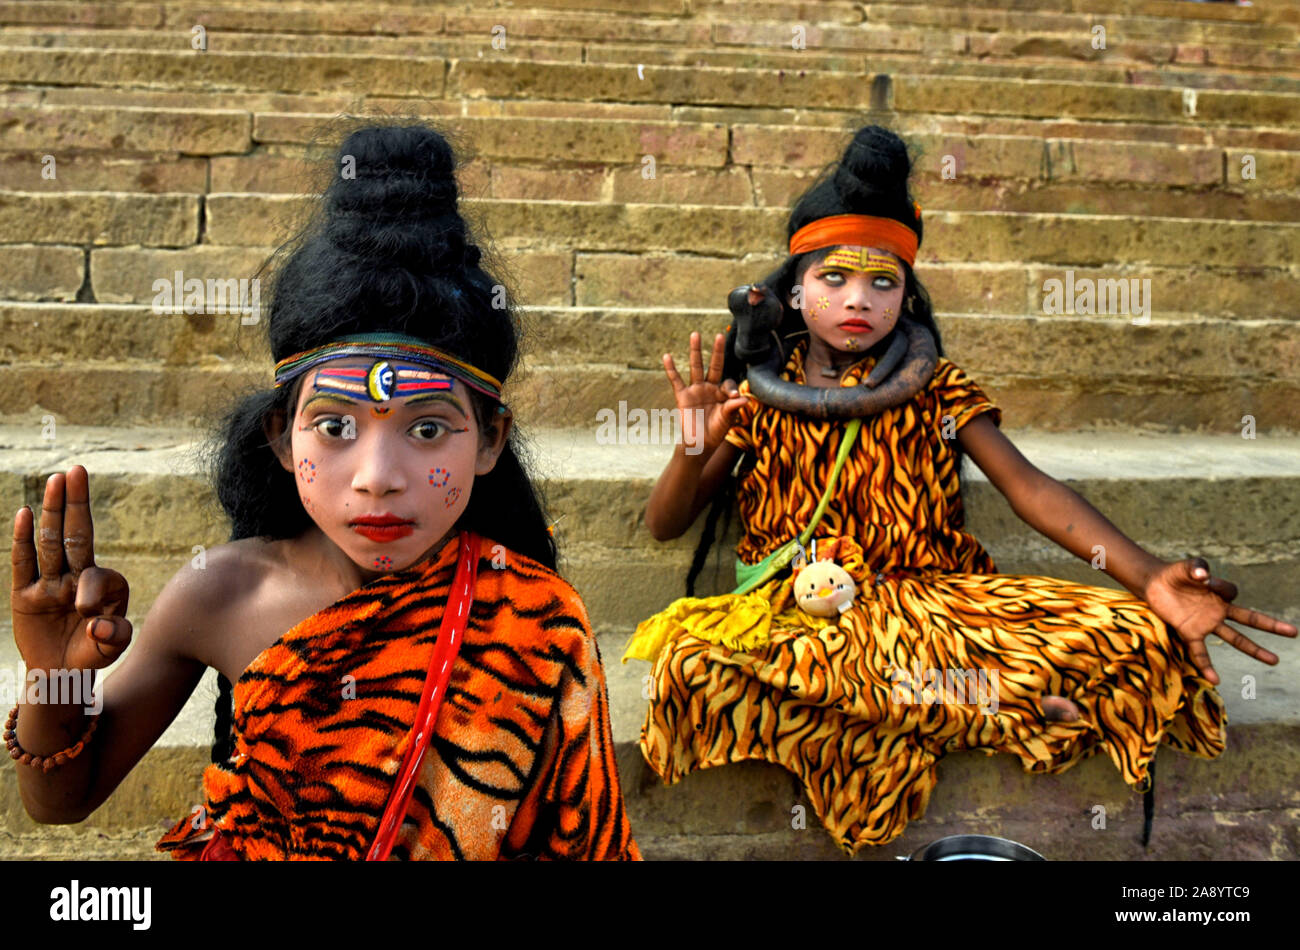 Two children dressed as Lord Shiva collecting Offerings from Devotees during the festival.Dev deepavali / Diwali is the biggest festival of light celebration in Kartik Poornima (Mid-Autumn) where devotees decorate the river bank with millions of Lamps as part of the festival. Stock Photo